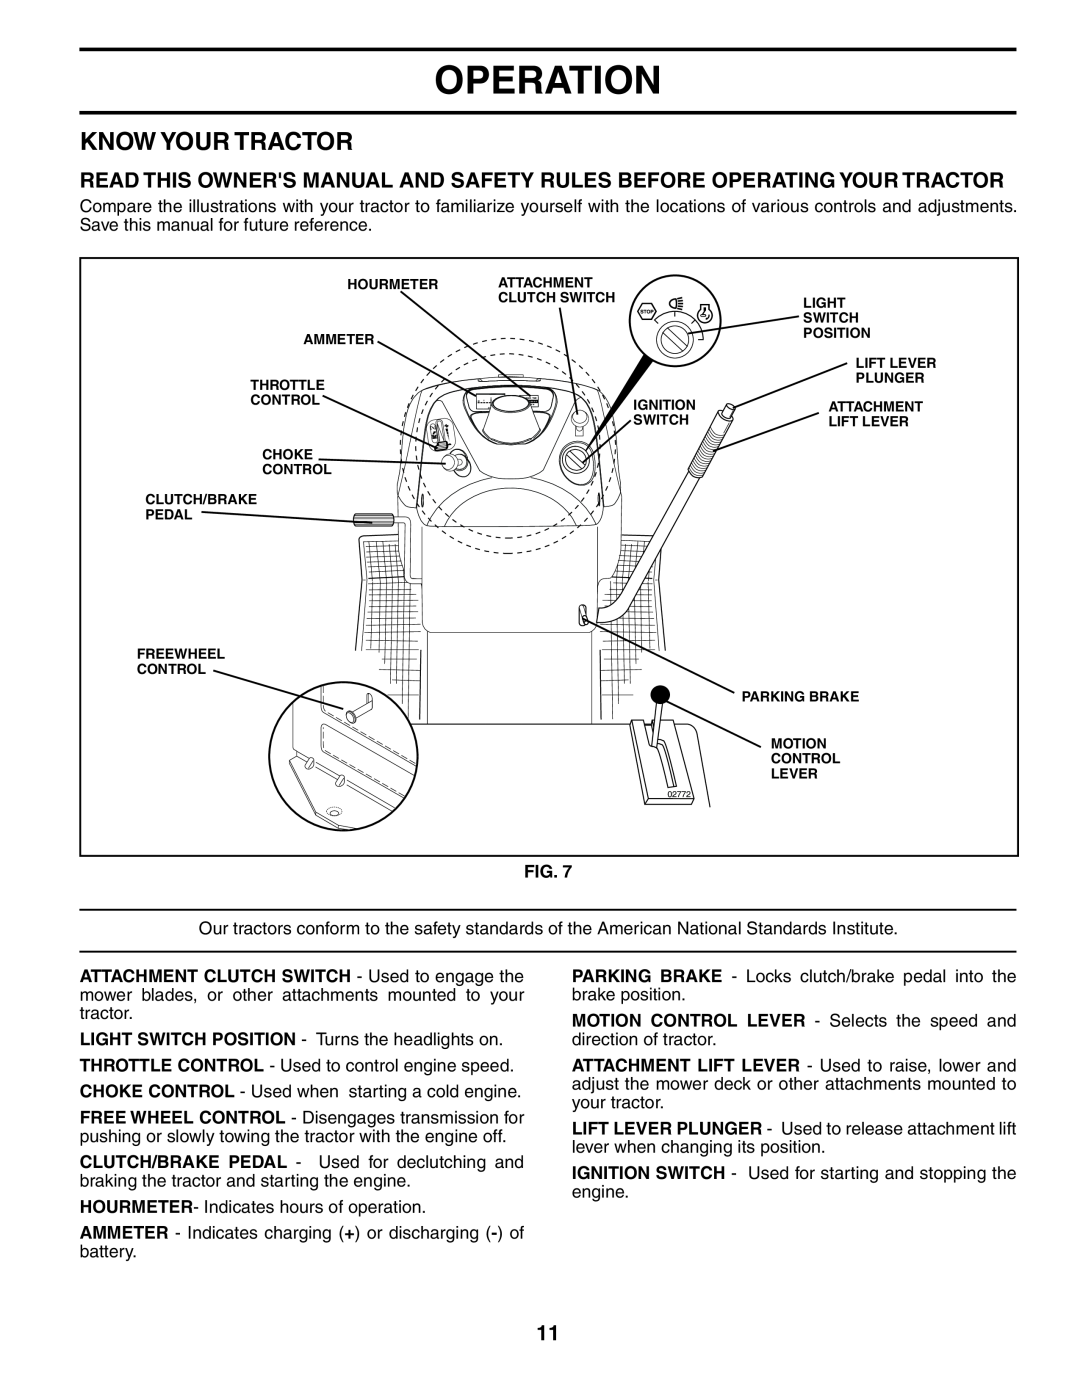 Husqvarna YTH2148 owner manual Know Your Tractor, Operation 